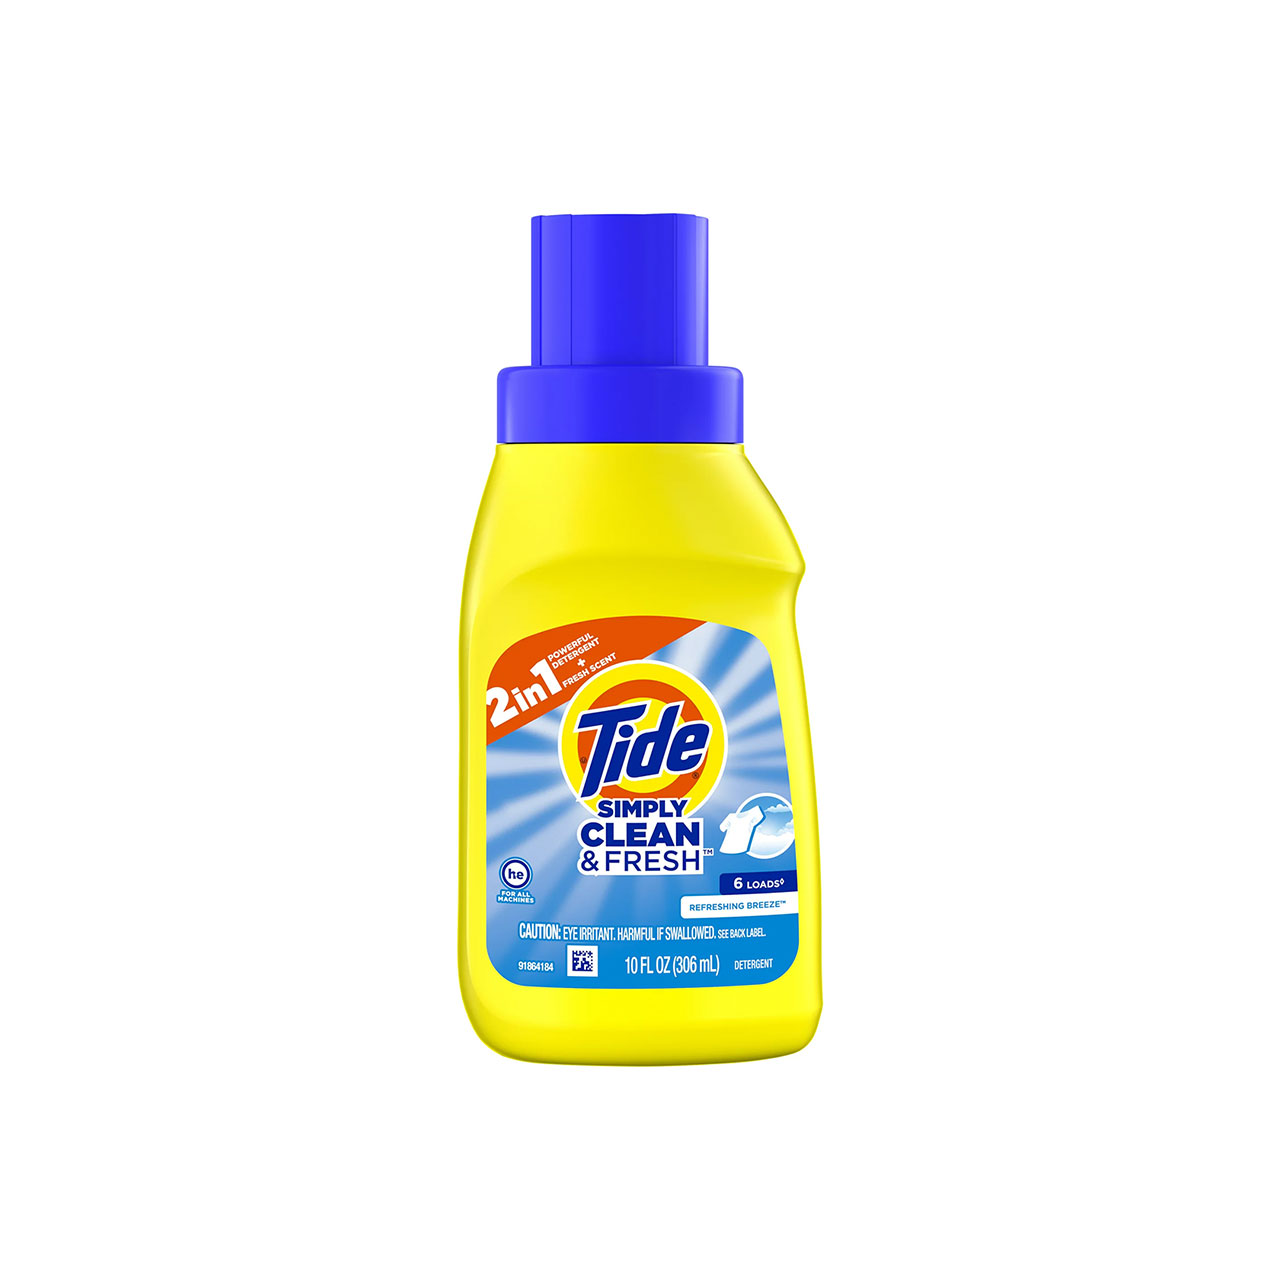 TIDE (タイド) Tide Simply Clean and Fresh Liquid Laundry Detergent Refreshing Breeze 10oz 306ml お試し タイド 洗剤 リキッド 洗濯洗剤 液体 液体洗剤 本体 濃縮 PG アメリカ 海外 